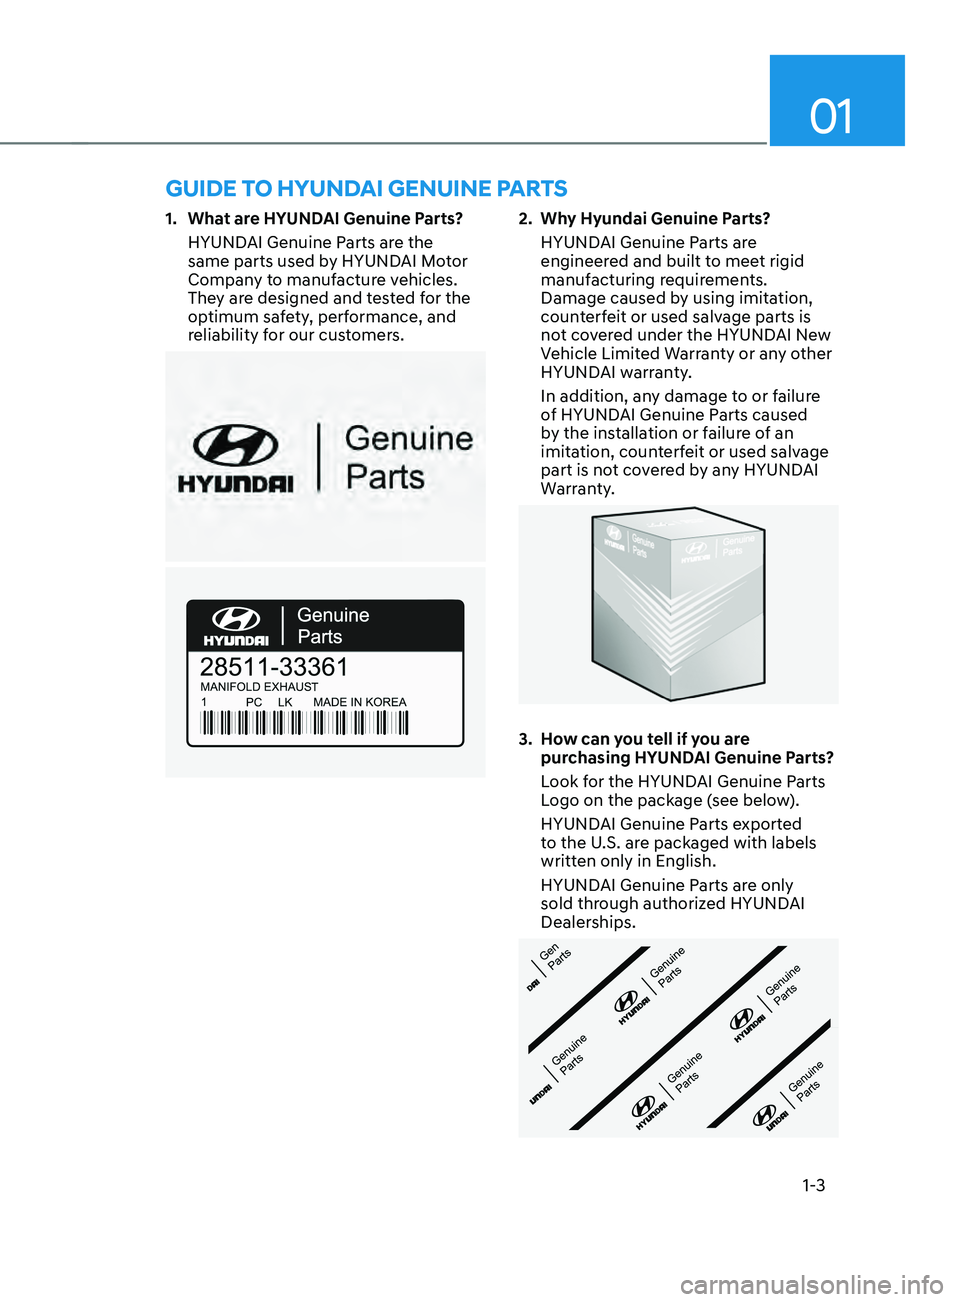 HYUNDAI SANTA FE CALLIGRAPHY 2021  Owners Manual 01
1-3
GUIDE TO HYUNDAI GENUINE PARTS
1. What are HYUNDAI Genuine Parts?
HYUND
AI Genuine Parts are the 
same parts used by HYUNDAI Motor 
Company to manufacture vehicles. 
They are designed and teste